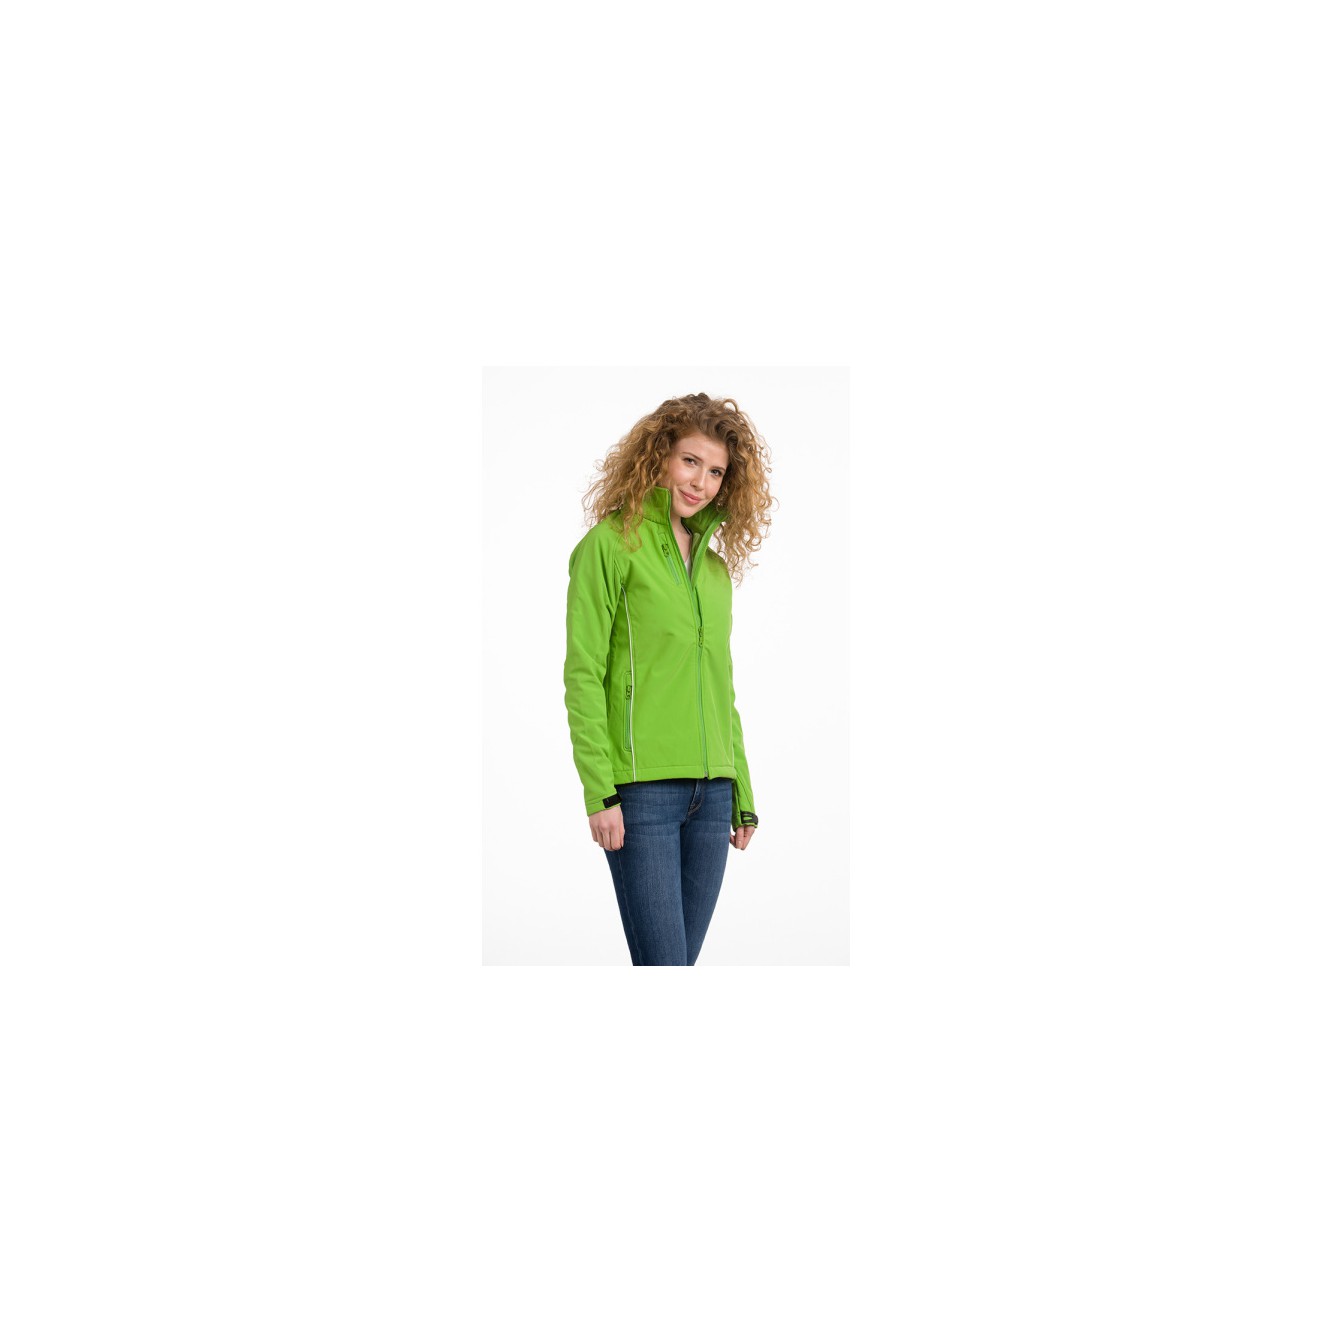 Jacket softshell for her